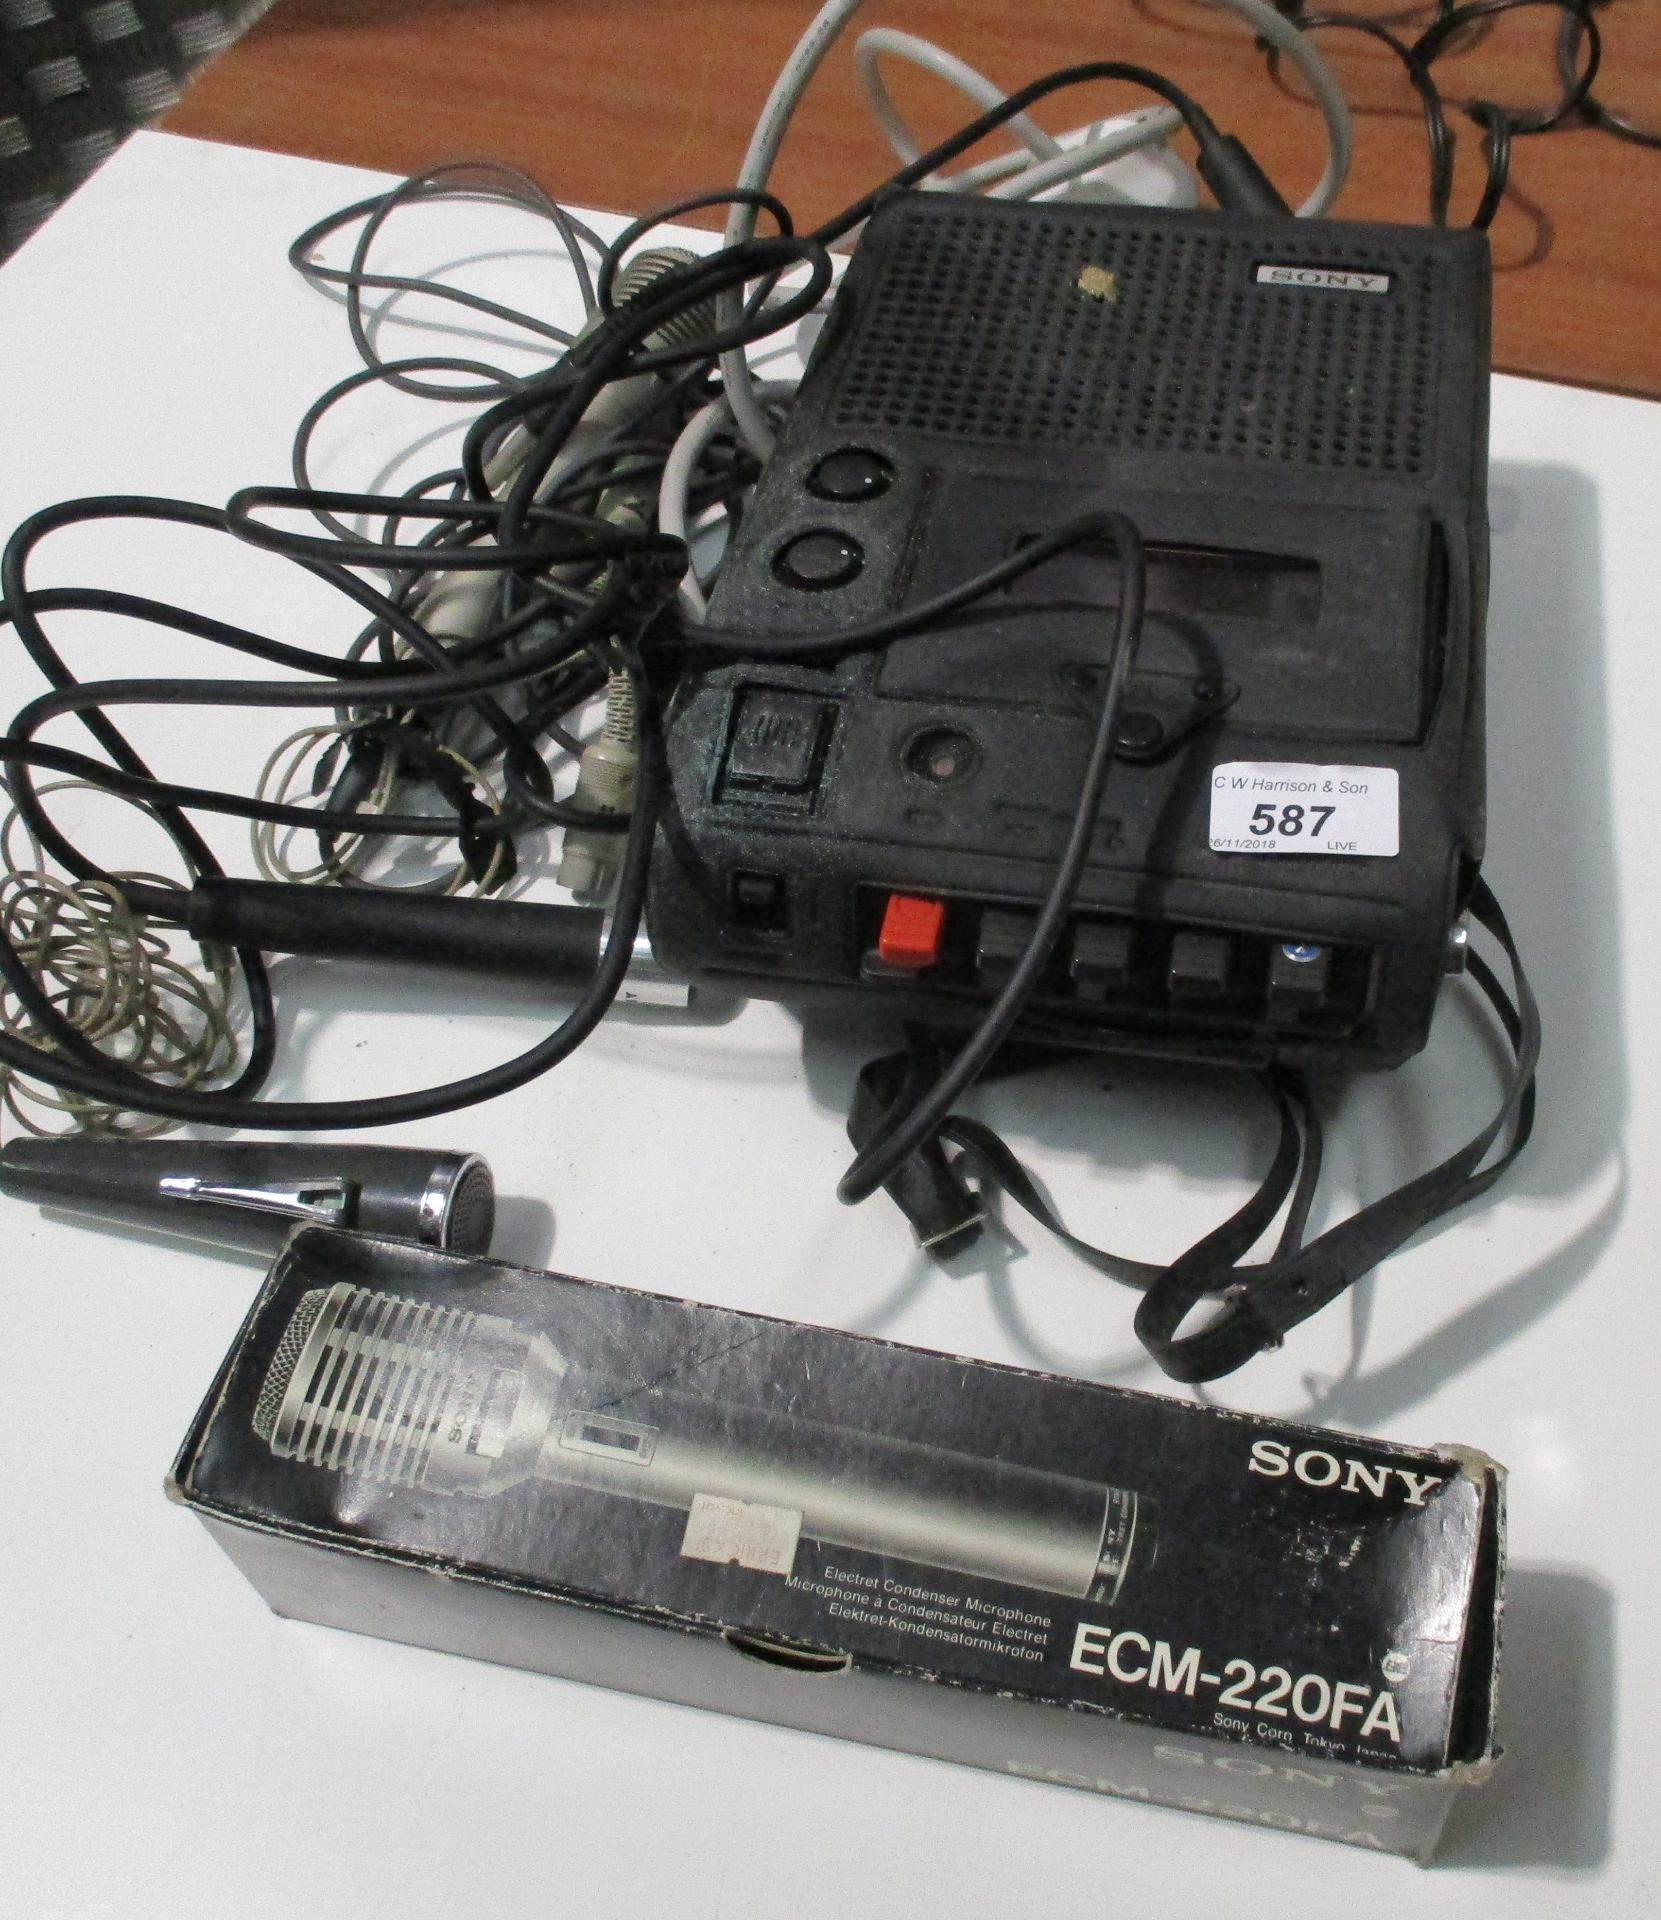 A Sony tape recorder with three microphones